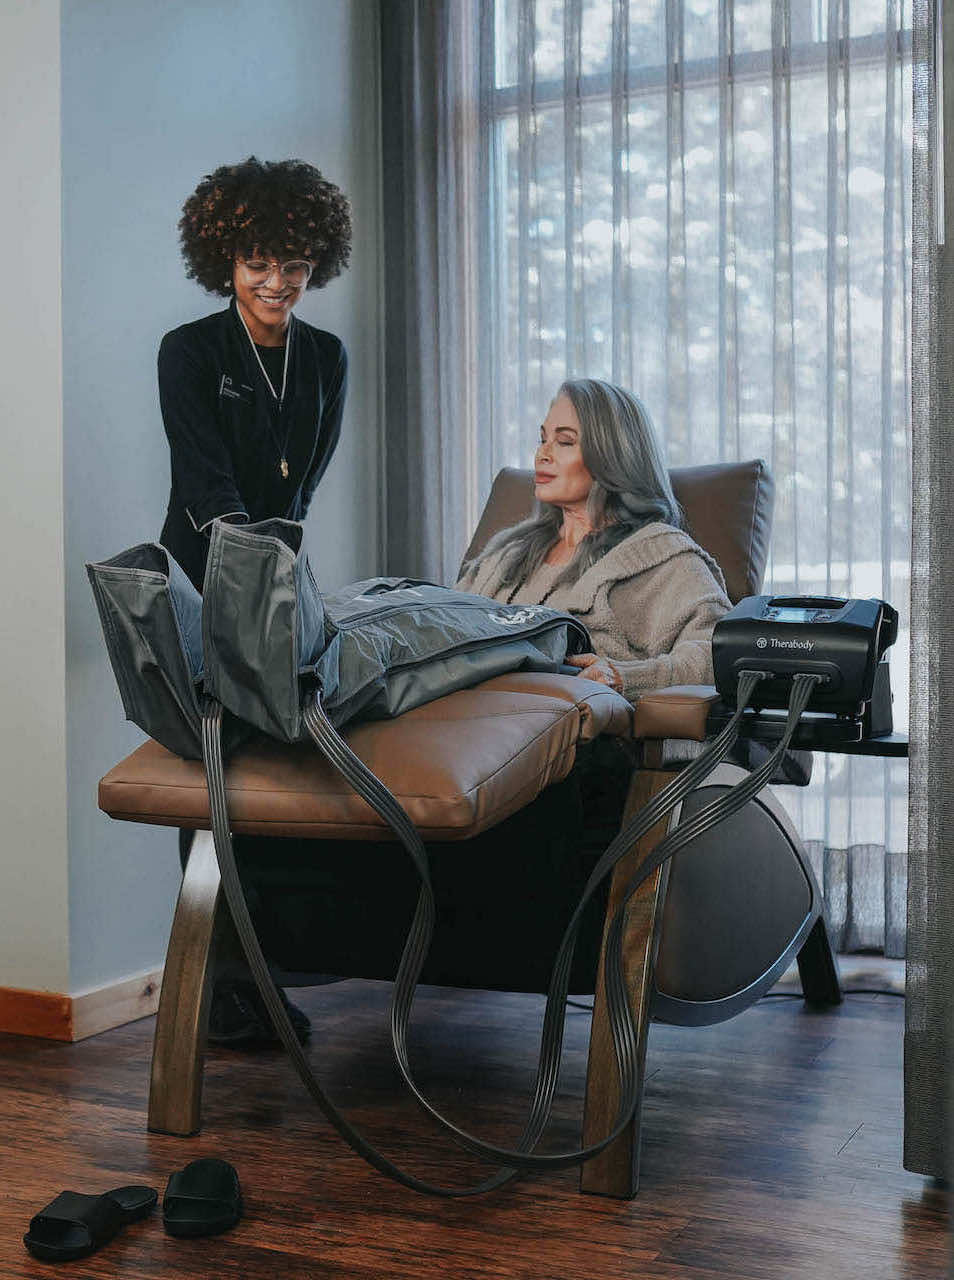 Spa employee attending a woman sitting in an anti-gravity chair